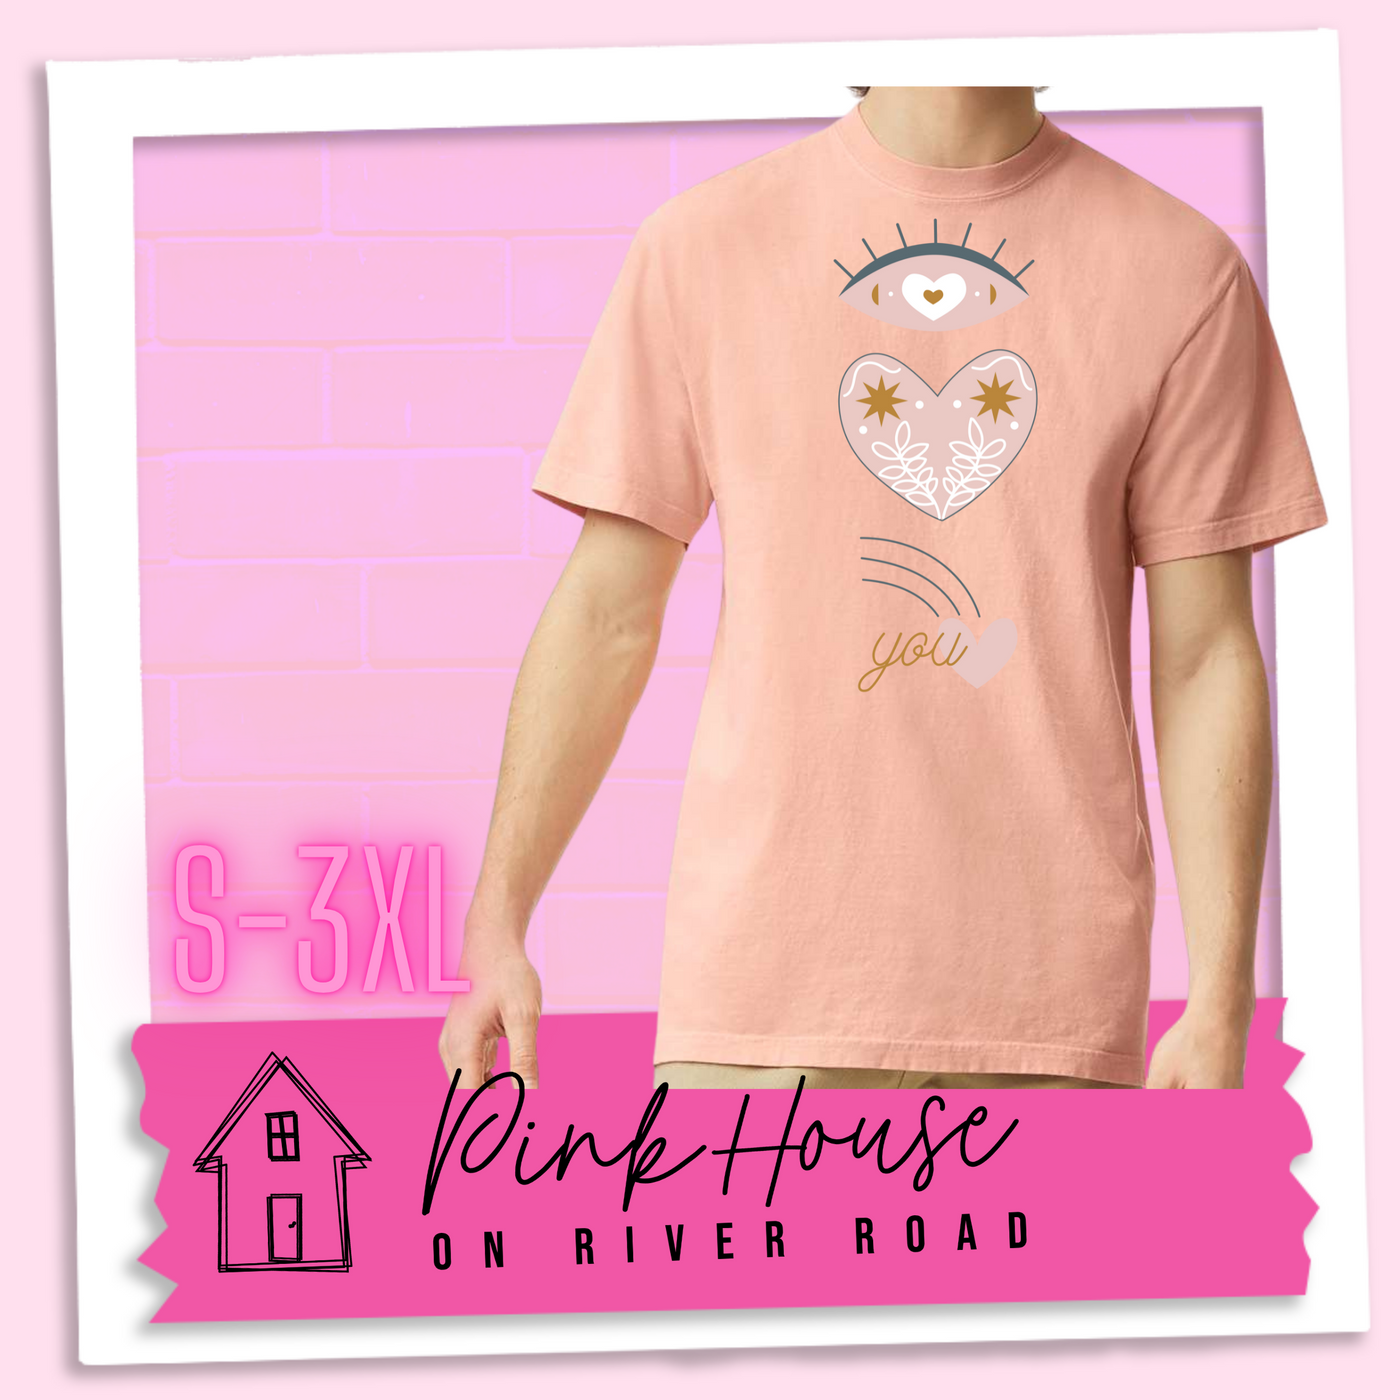 Peach tee with a graphic of an eye with a heart for the pupil and underneath that a heart with a floral and star design and a shooting heart with the word you. The graphic represents eye heart you